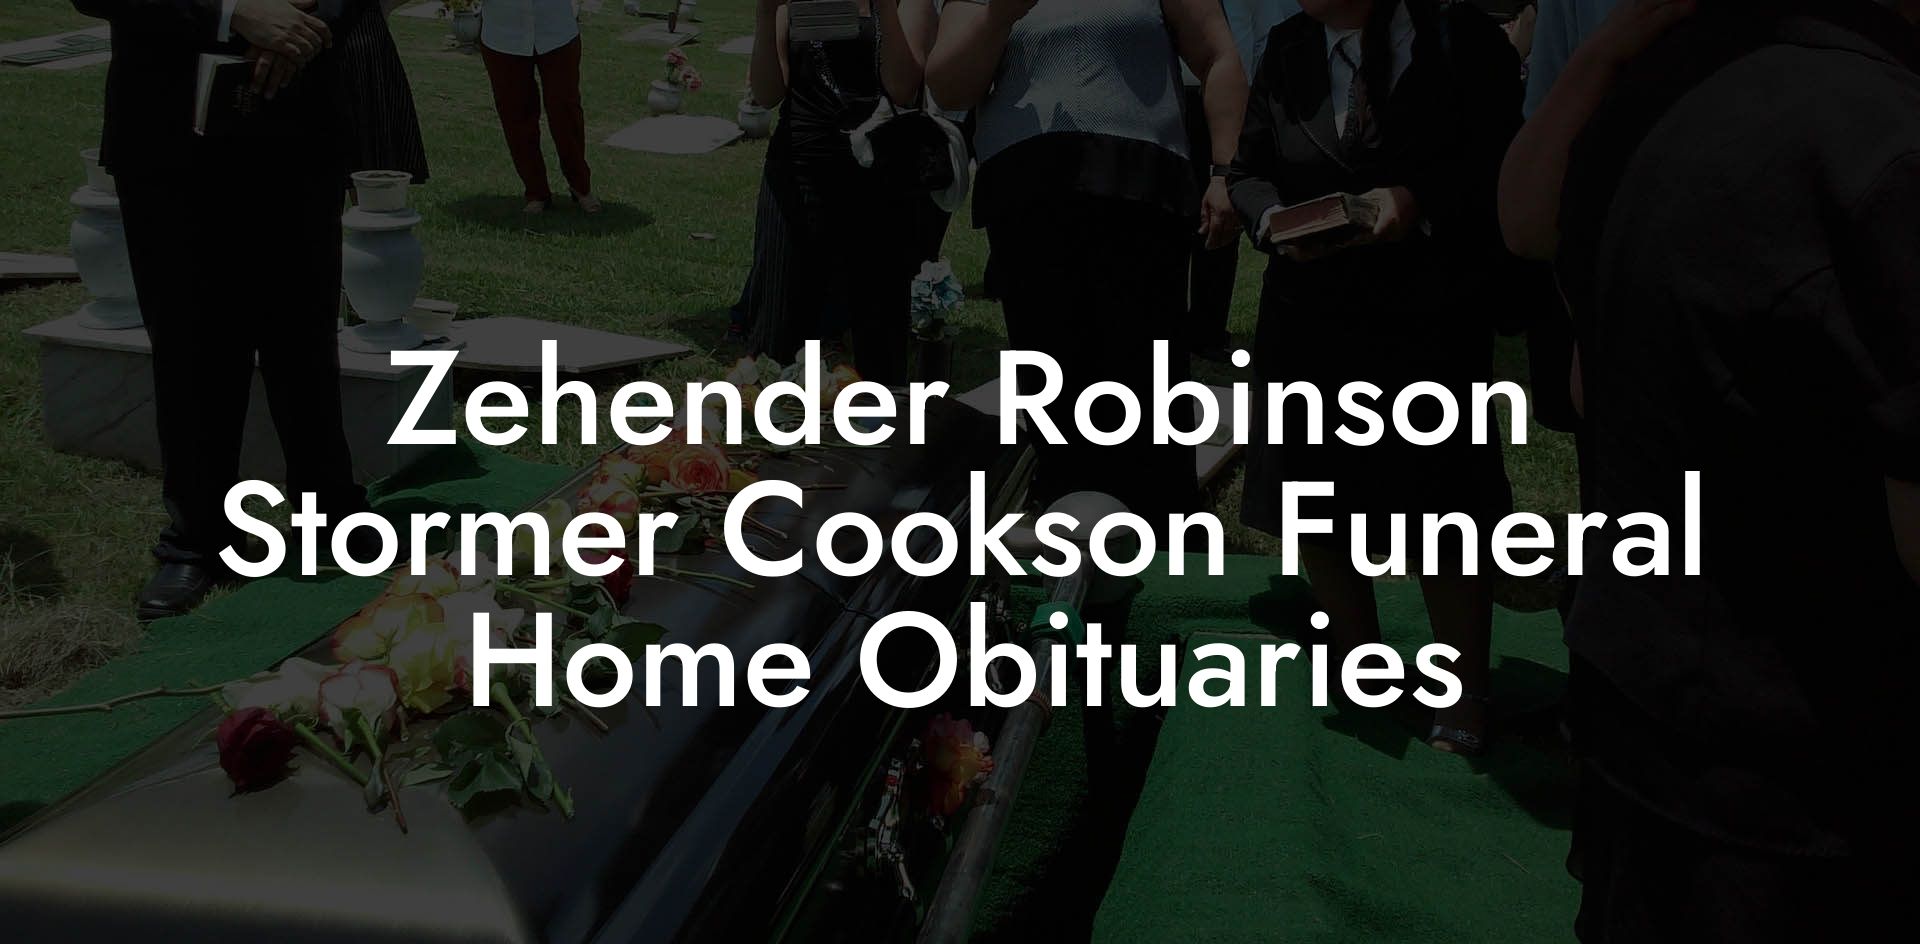 Zehender Robinson Stormer Cookson Funeral Home Obituaries